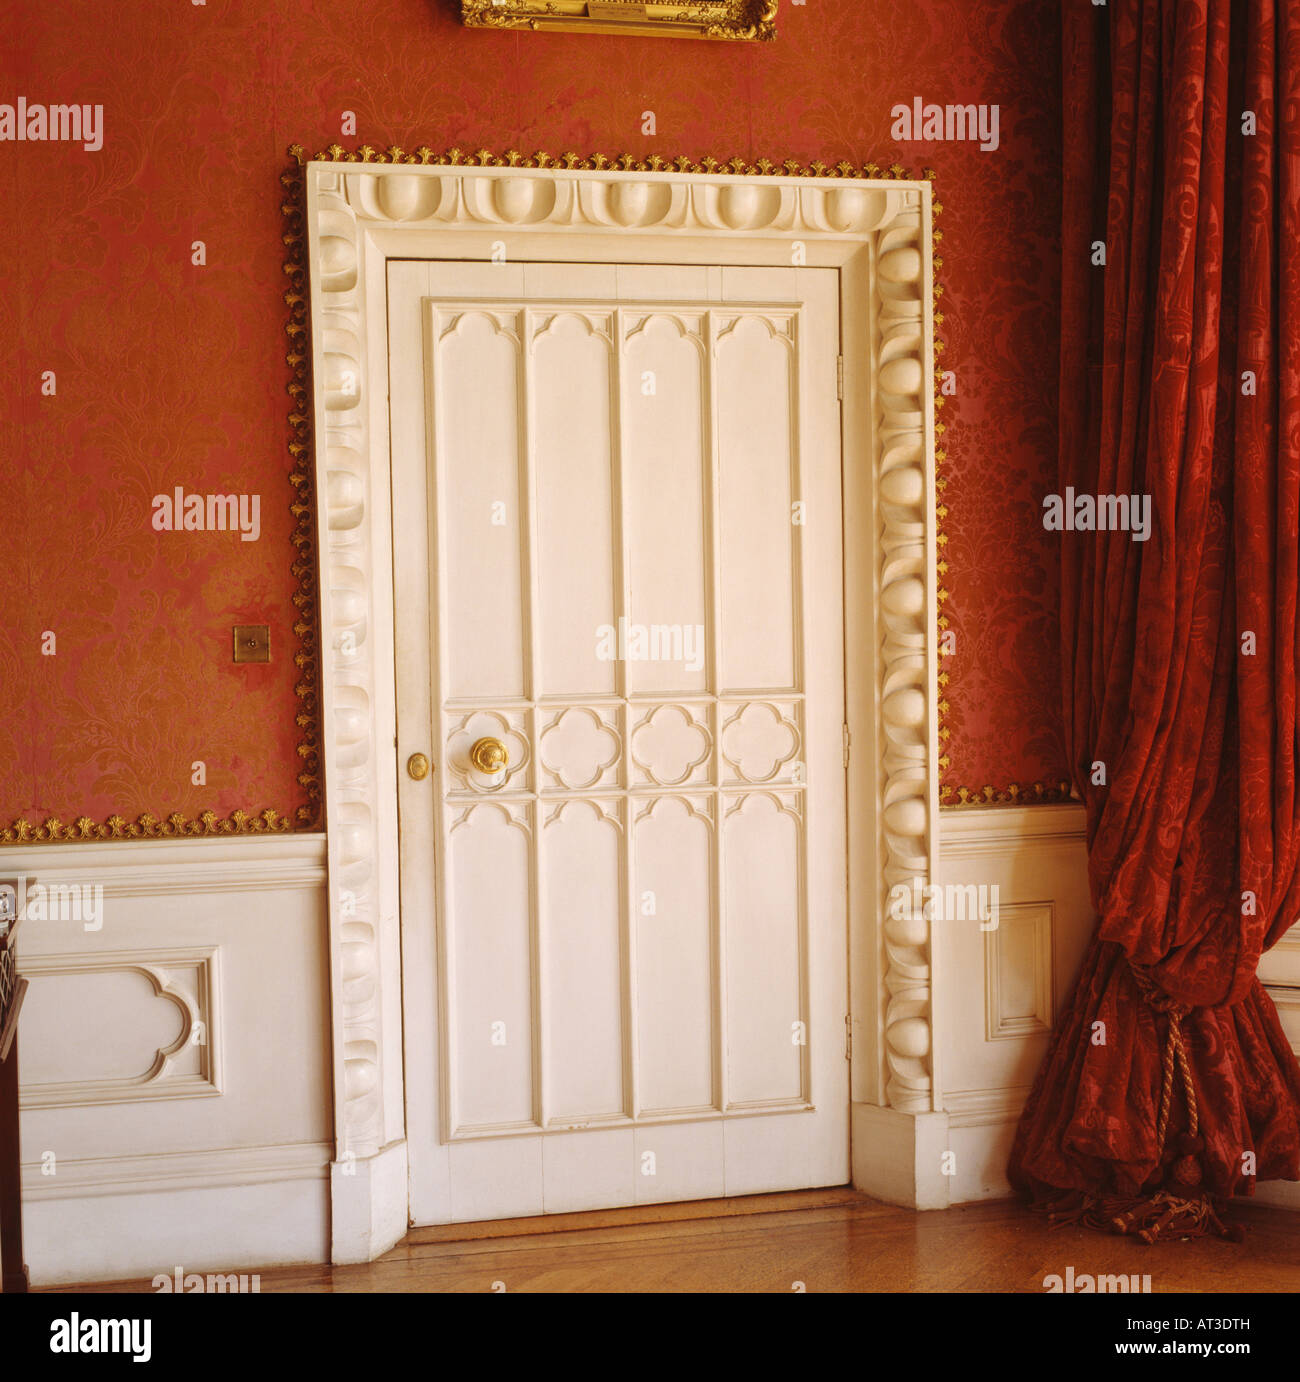 Close up of white Gothic door with ornately carved frame in red room with white wainscot paneling and red silk curtain Stock Photo